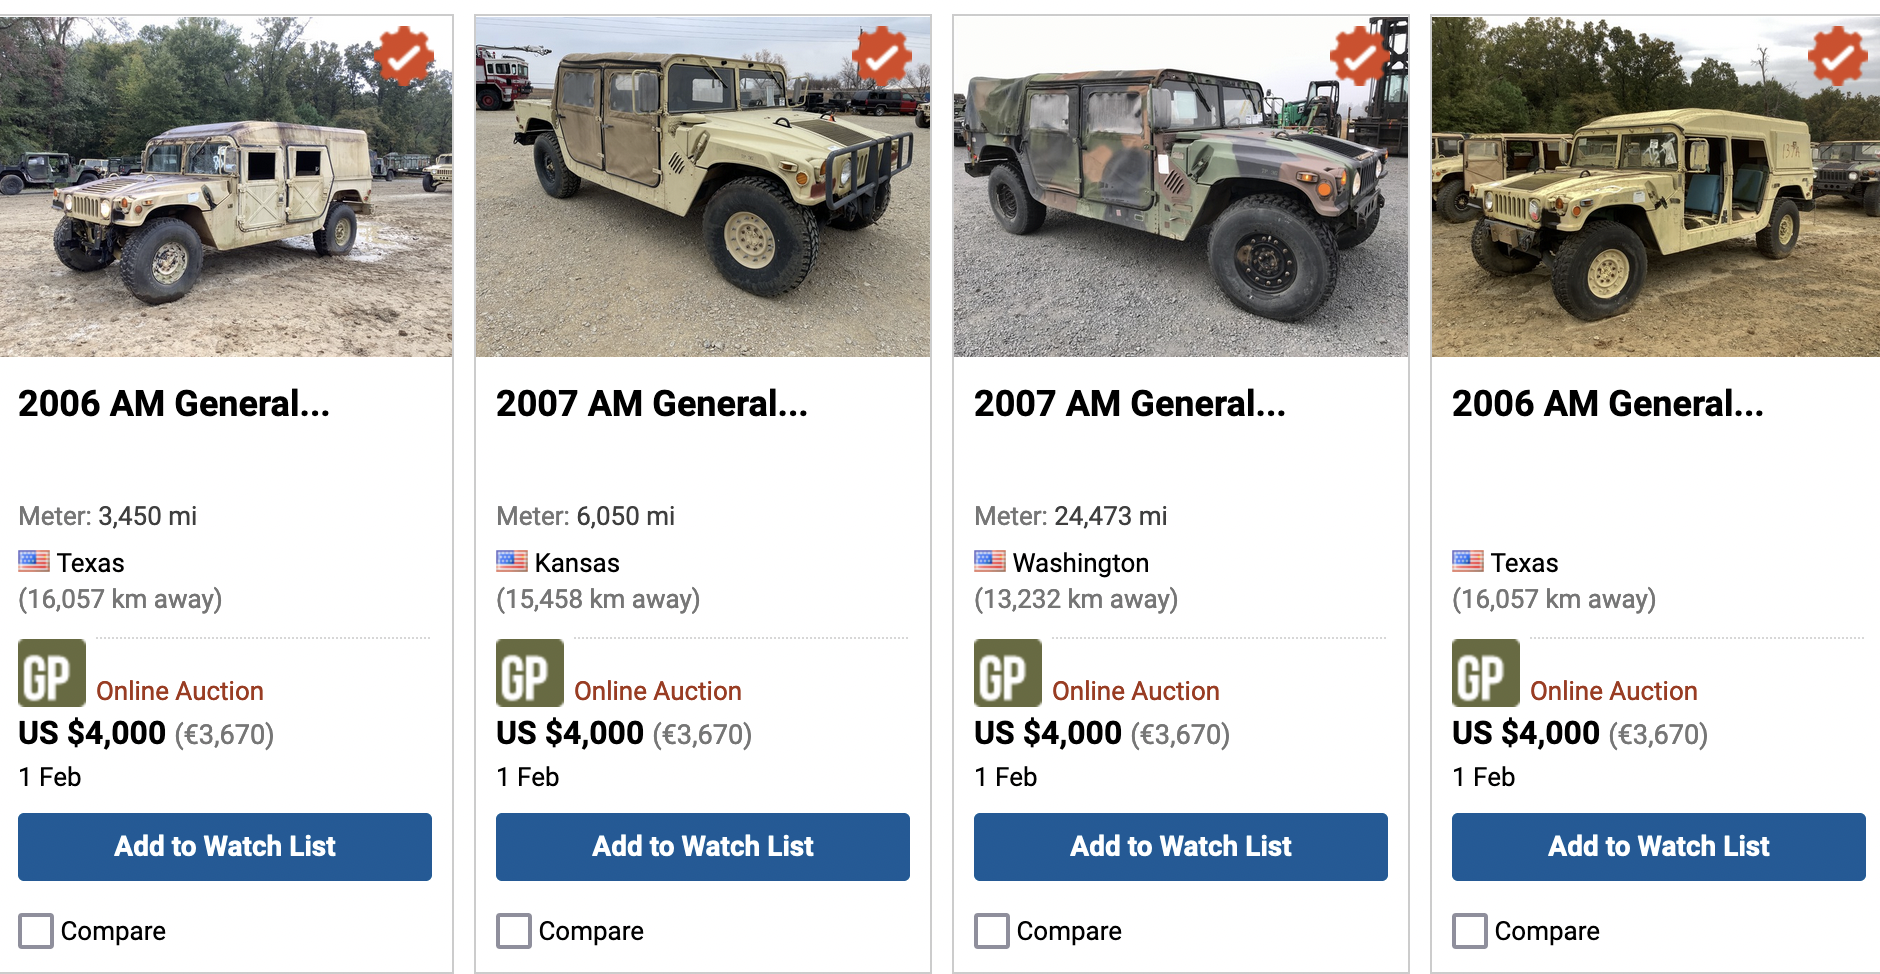 Where Can You Purchase a Humvee?